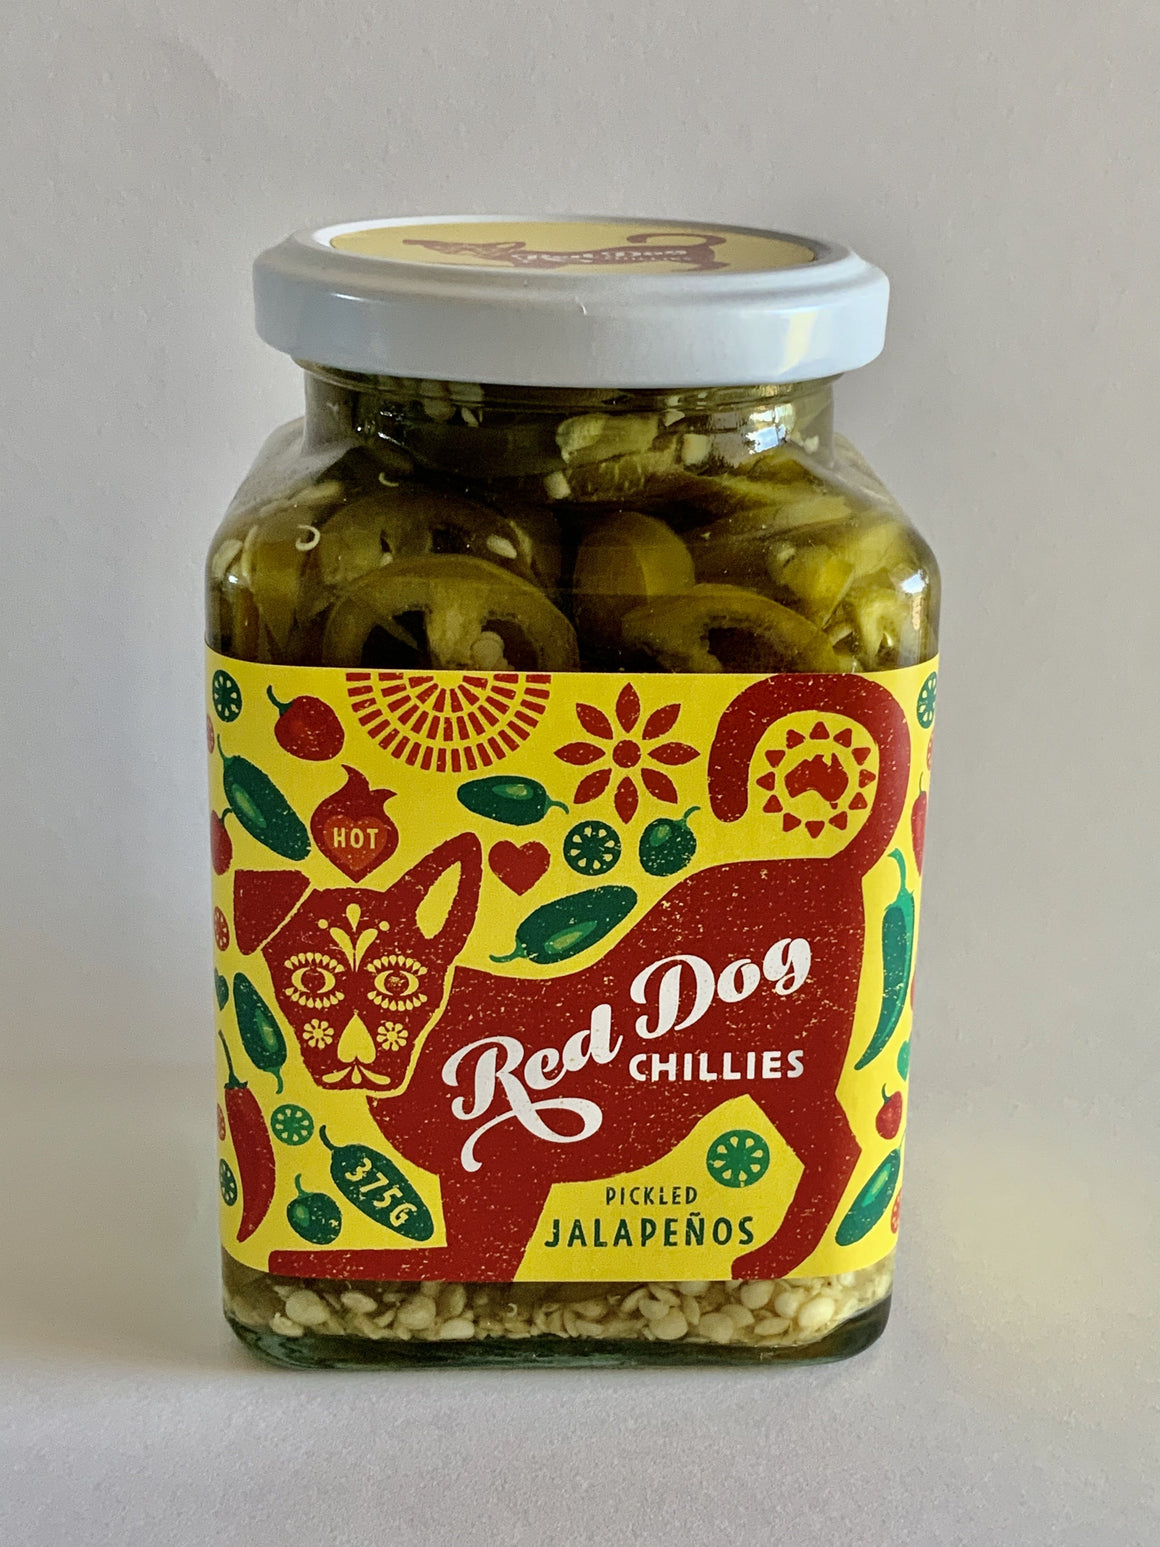 Red Dog Chillies Pickled Jalapeños - 375g